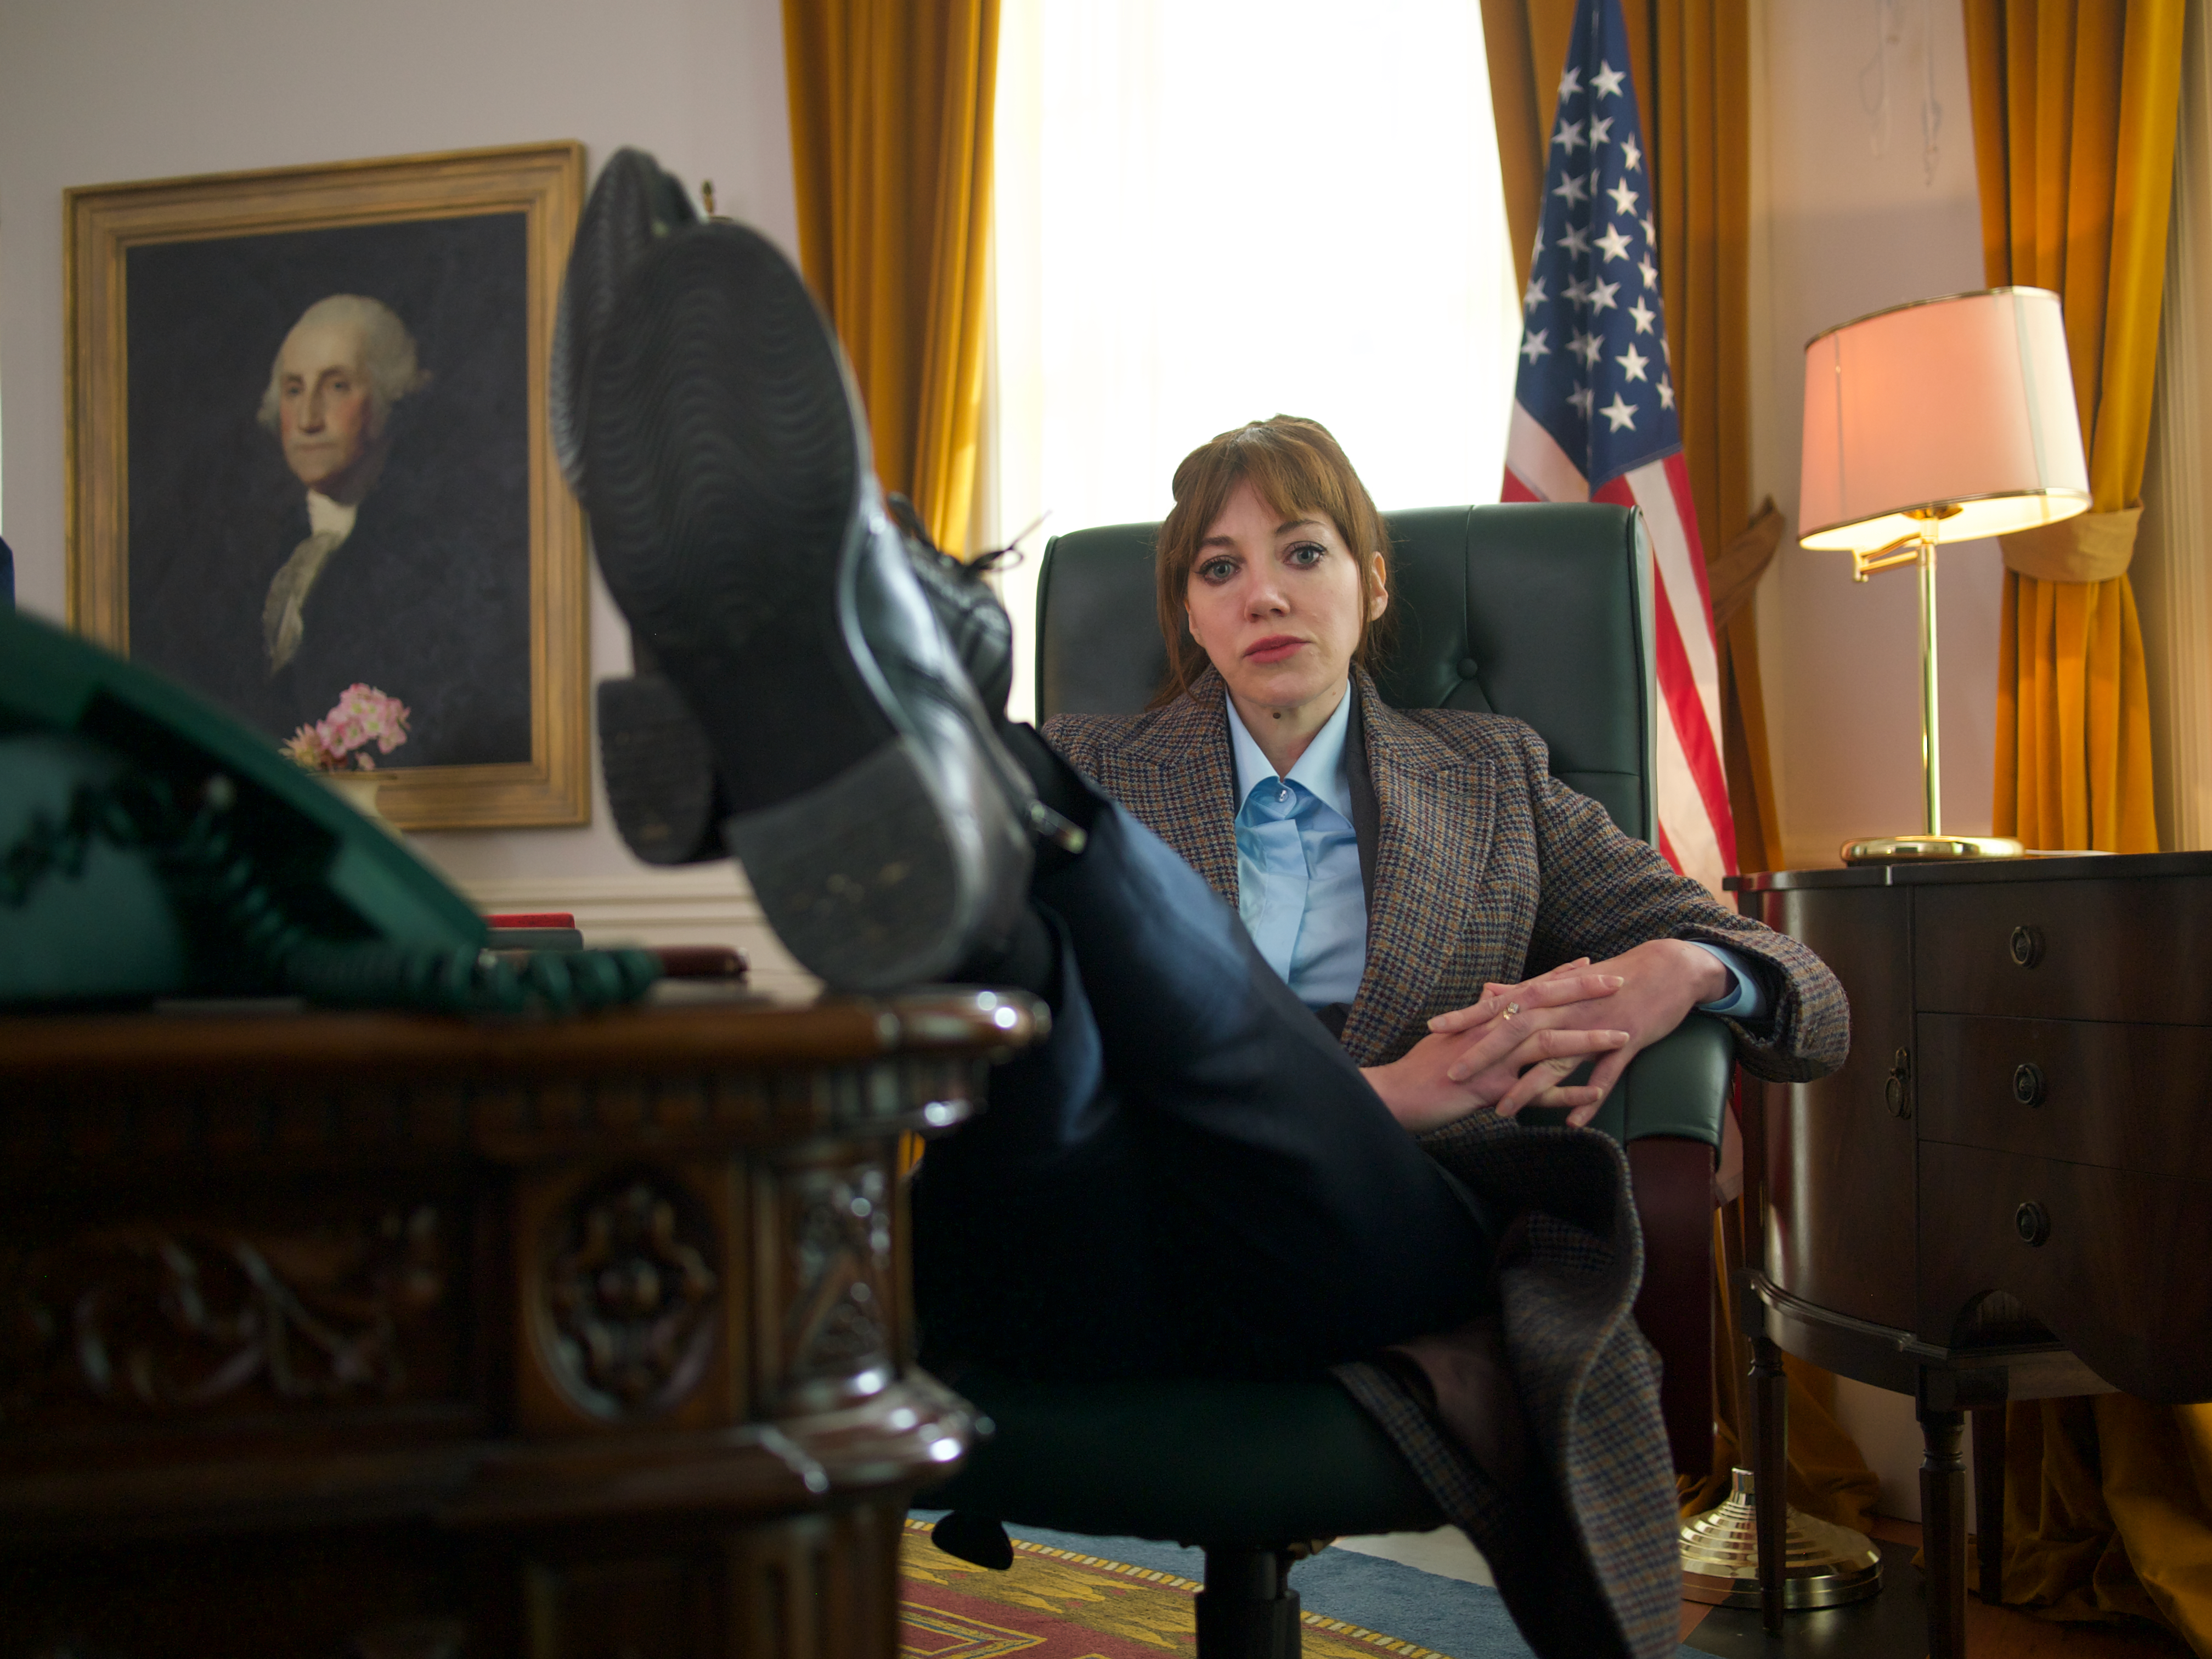 Diane Morgan as Philomena Cunk with in the White House in 'Cunk on Earth'. Image: Courtesy of Netflix